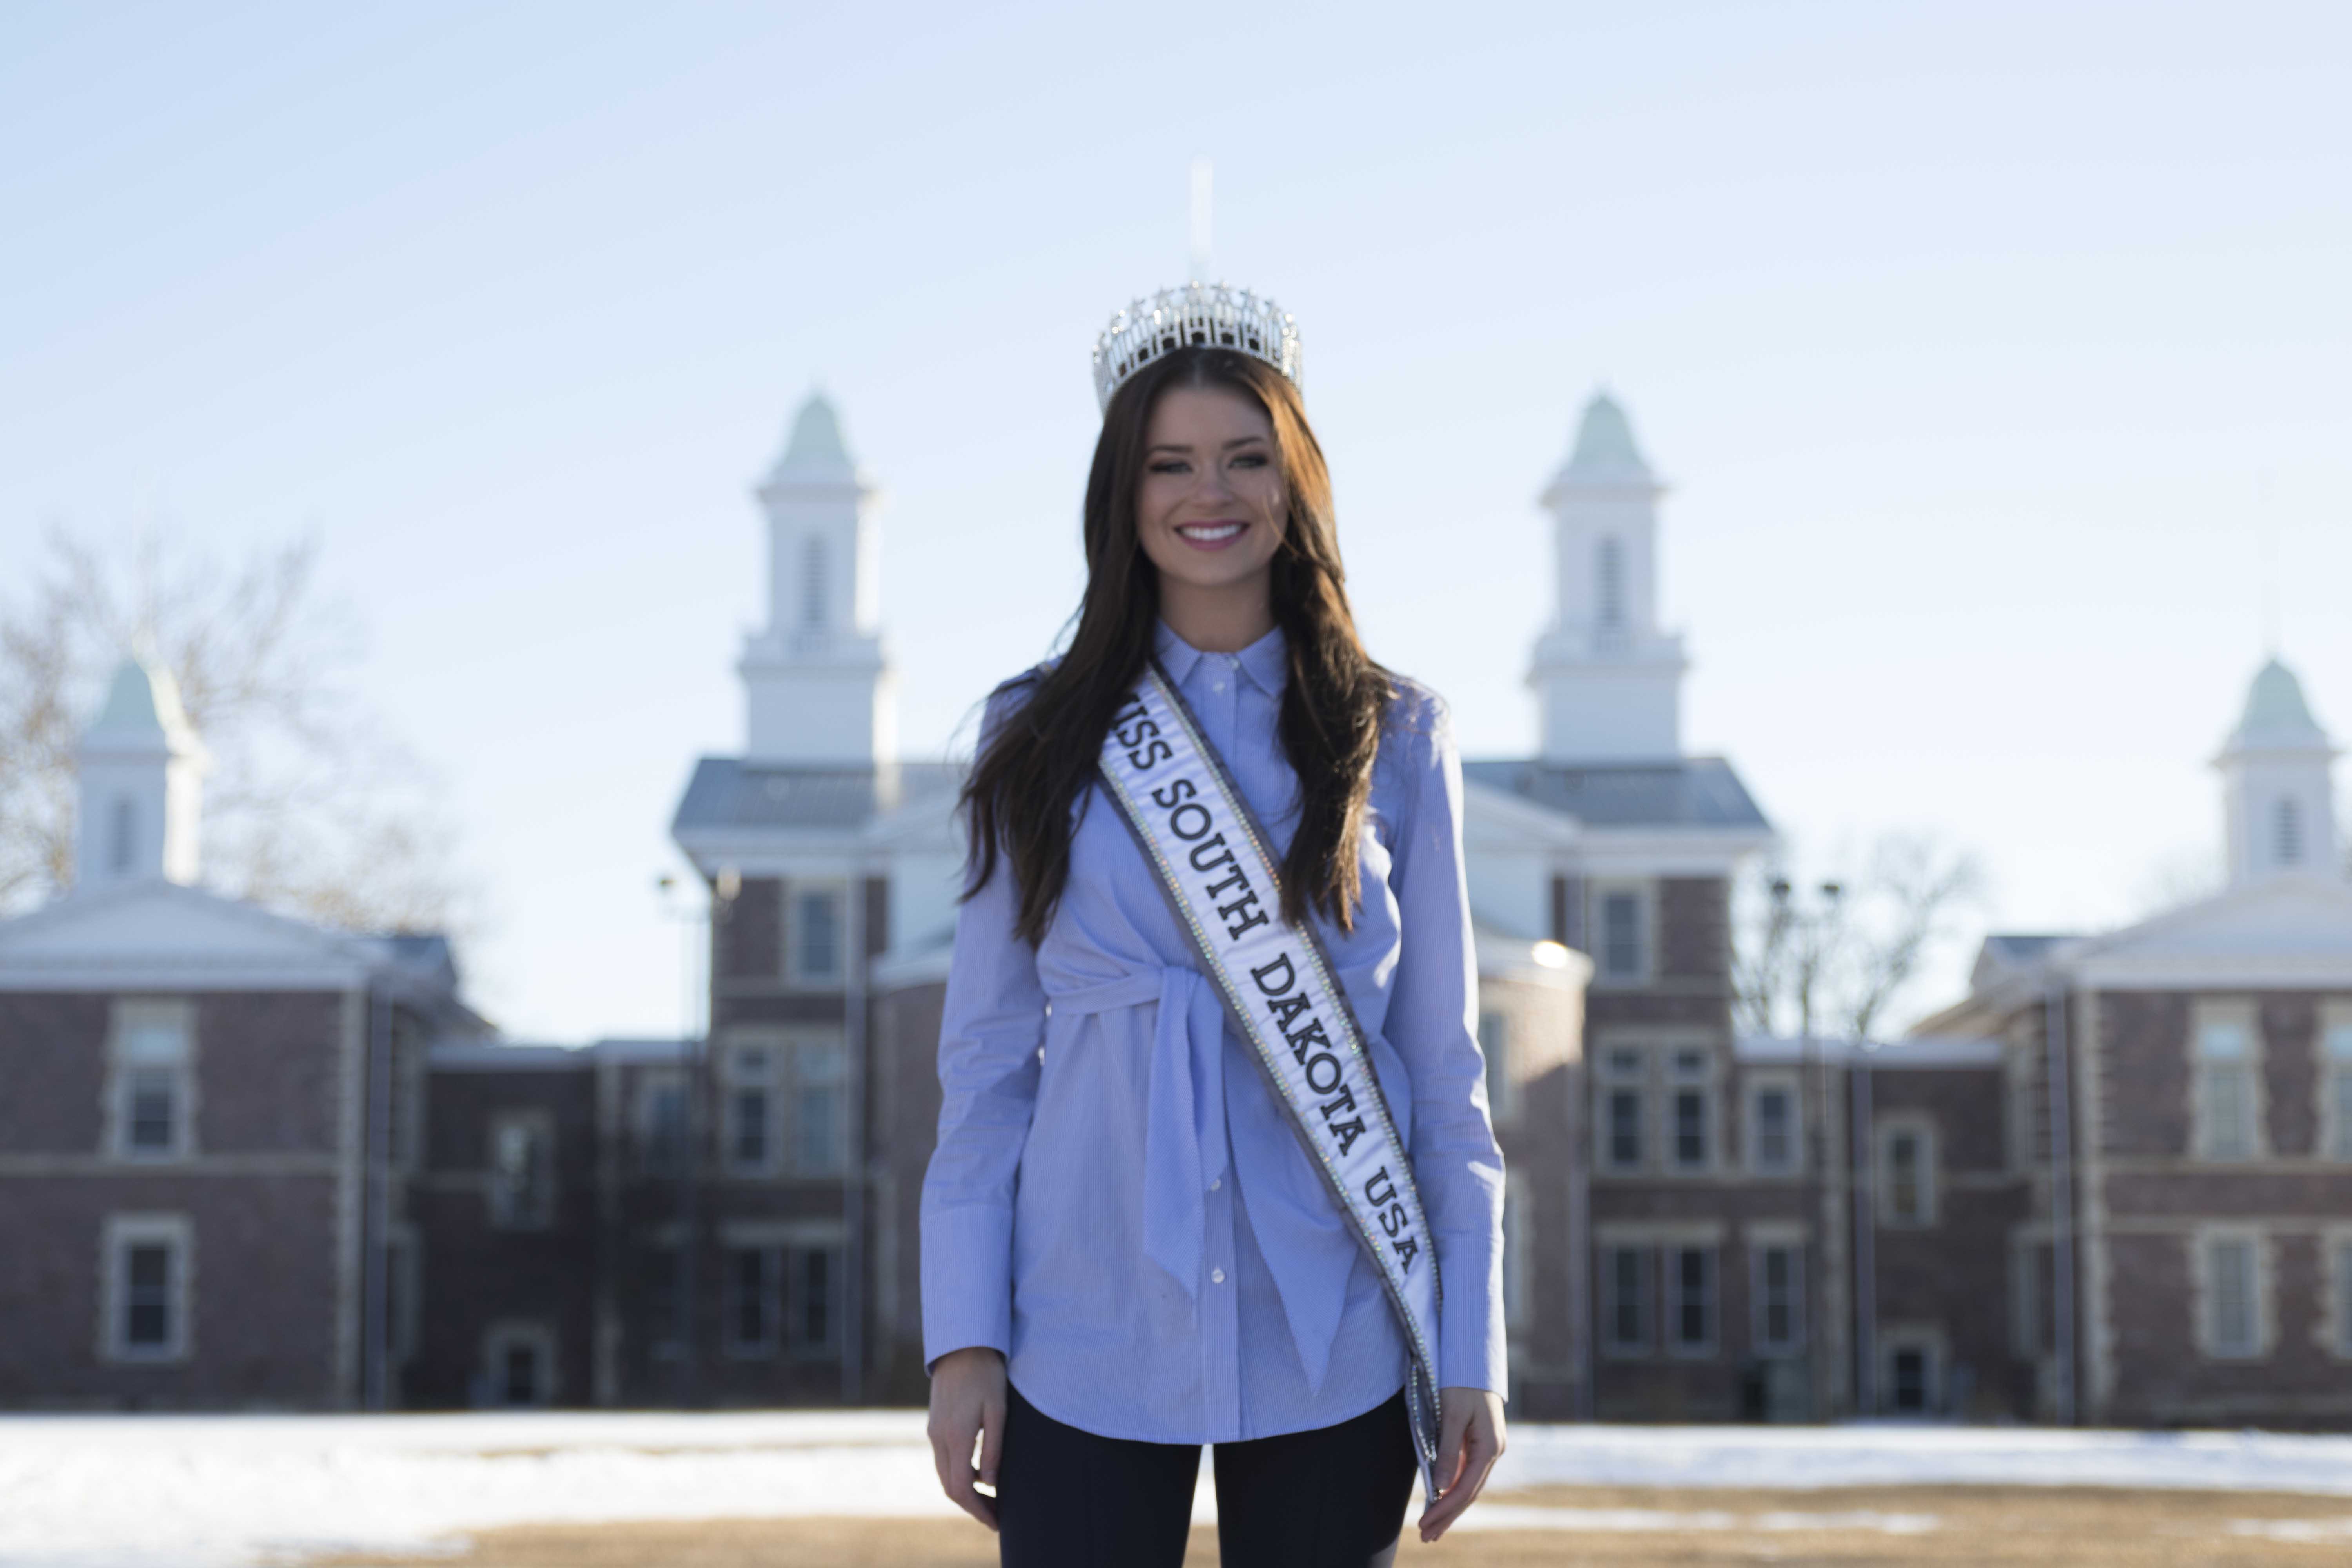 Full-time student, part-time Miss SD USA